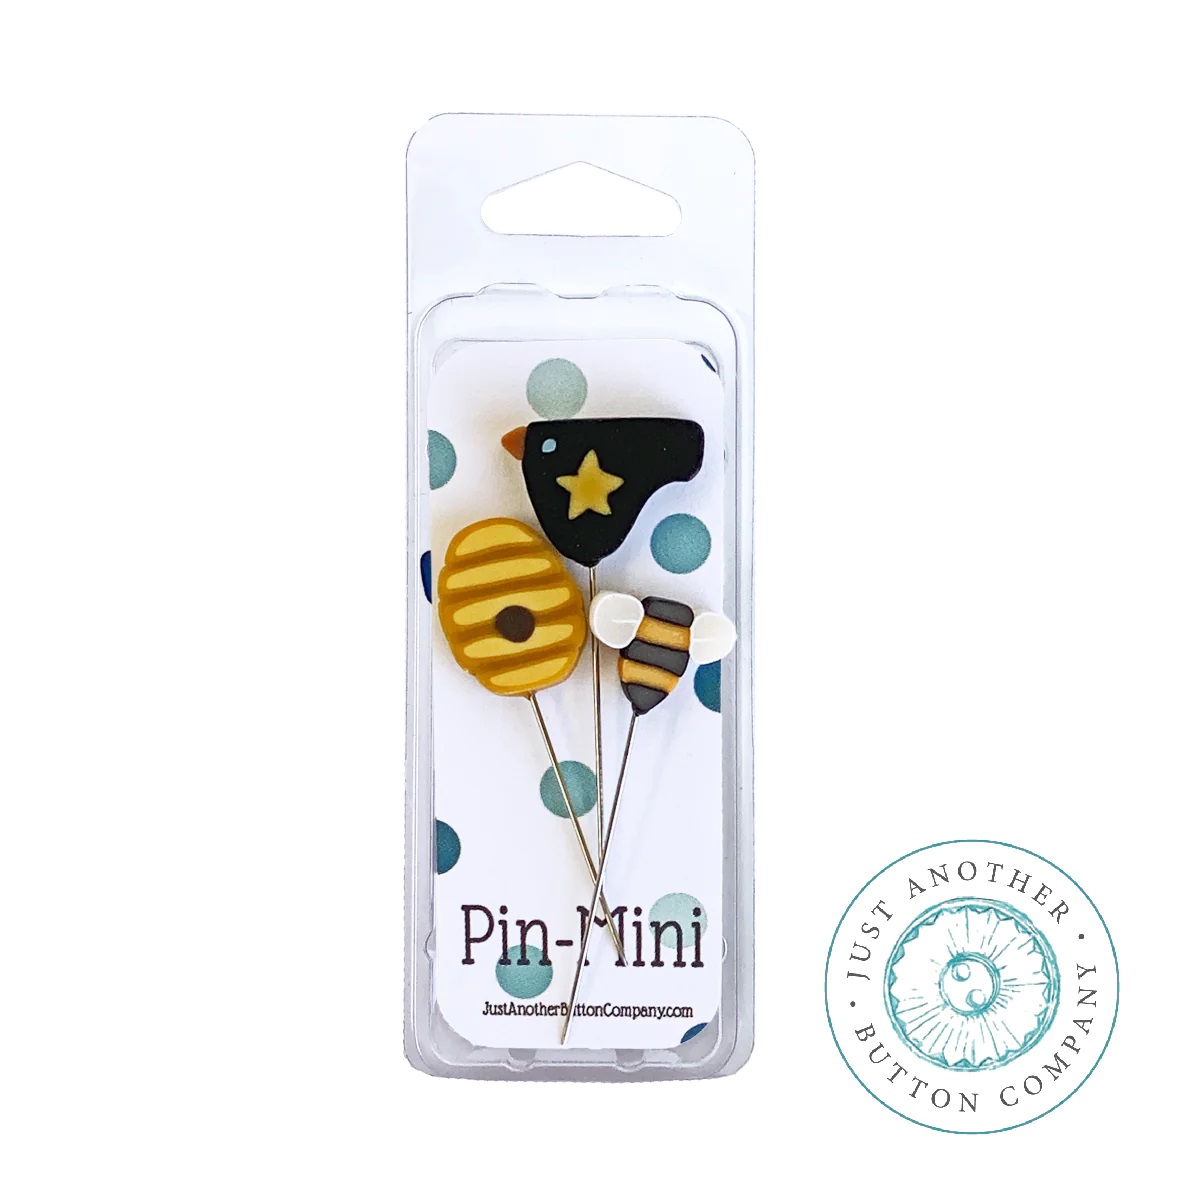 jpm548 Bee Town : Pin-Mini : by Just Another Button Company